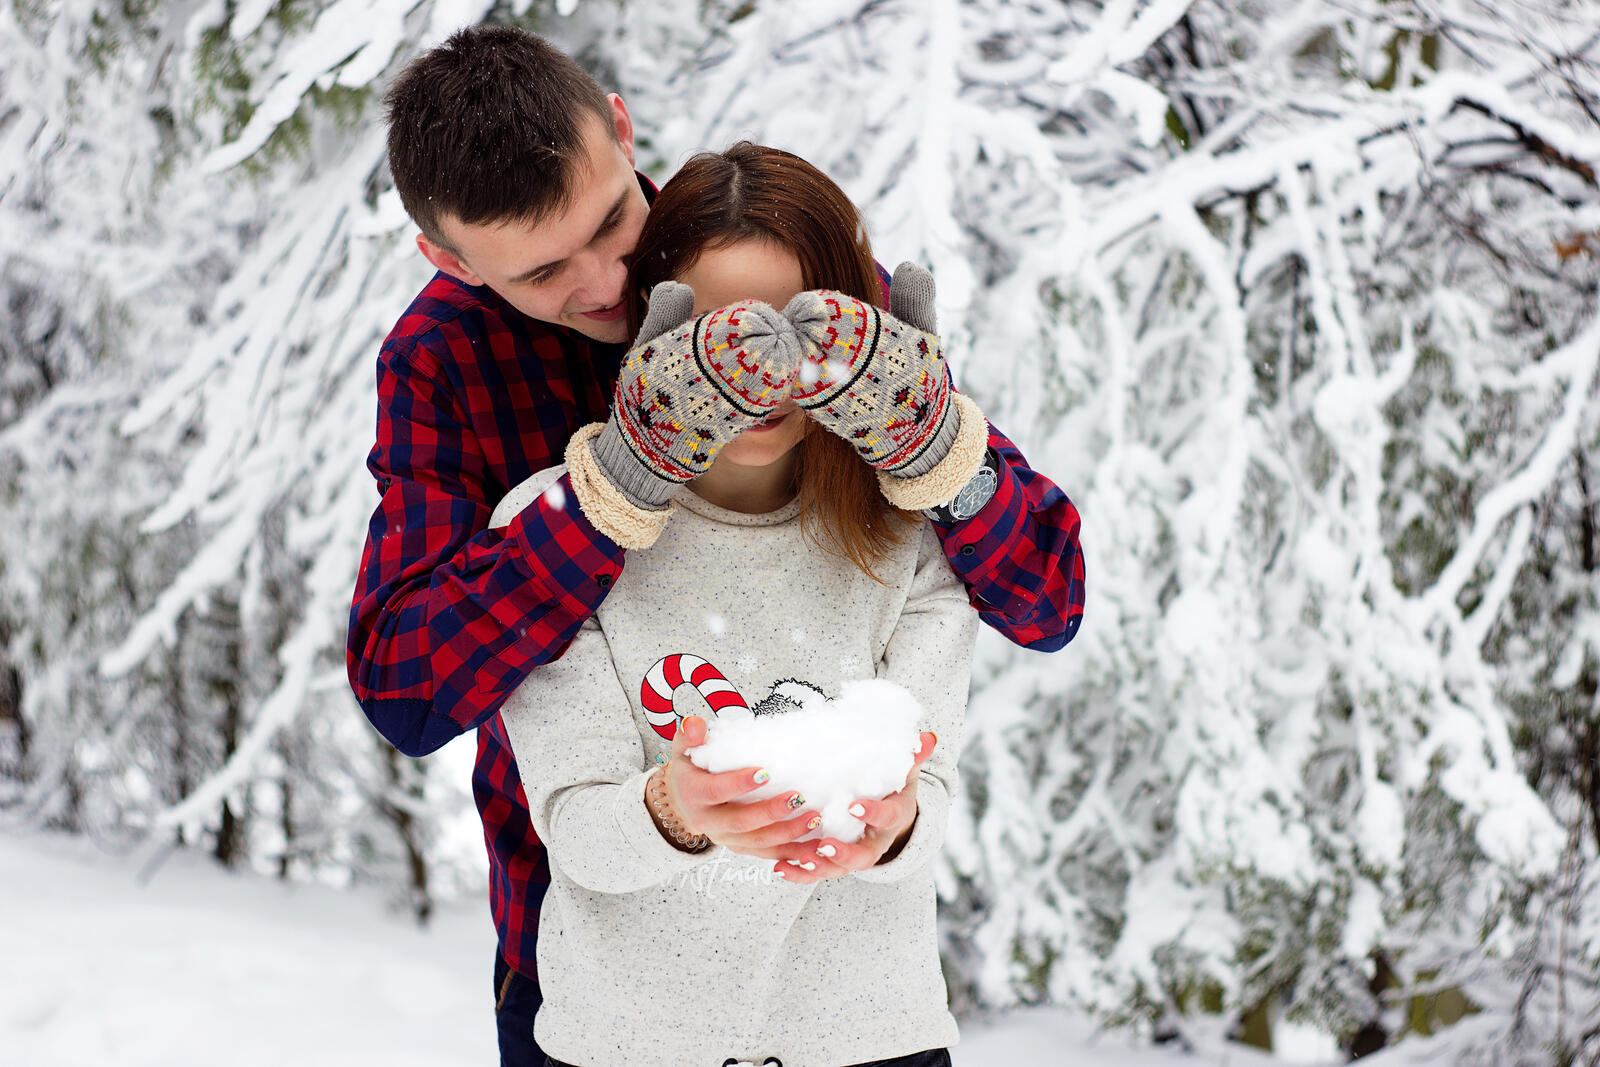 Free photo A couple in love playing snowballs